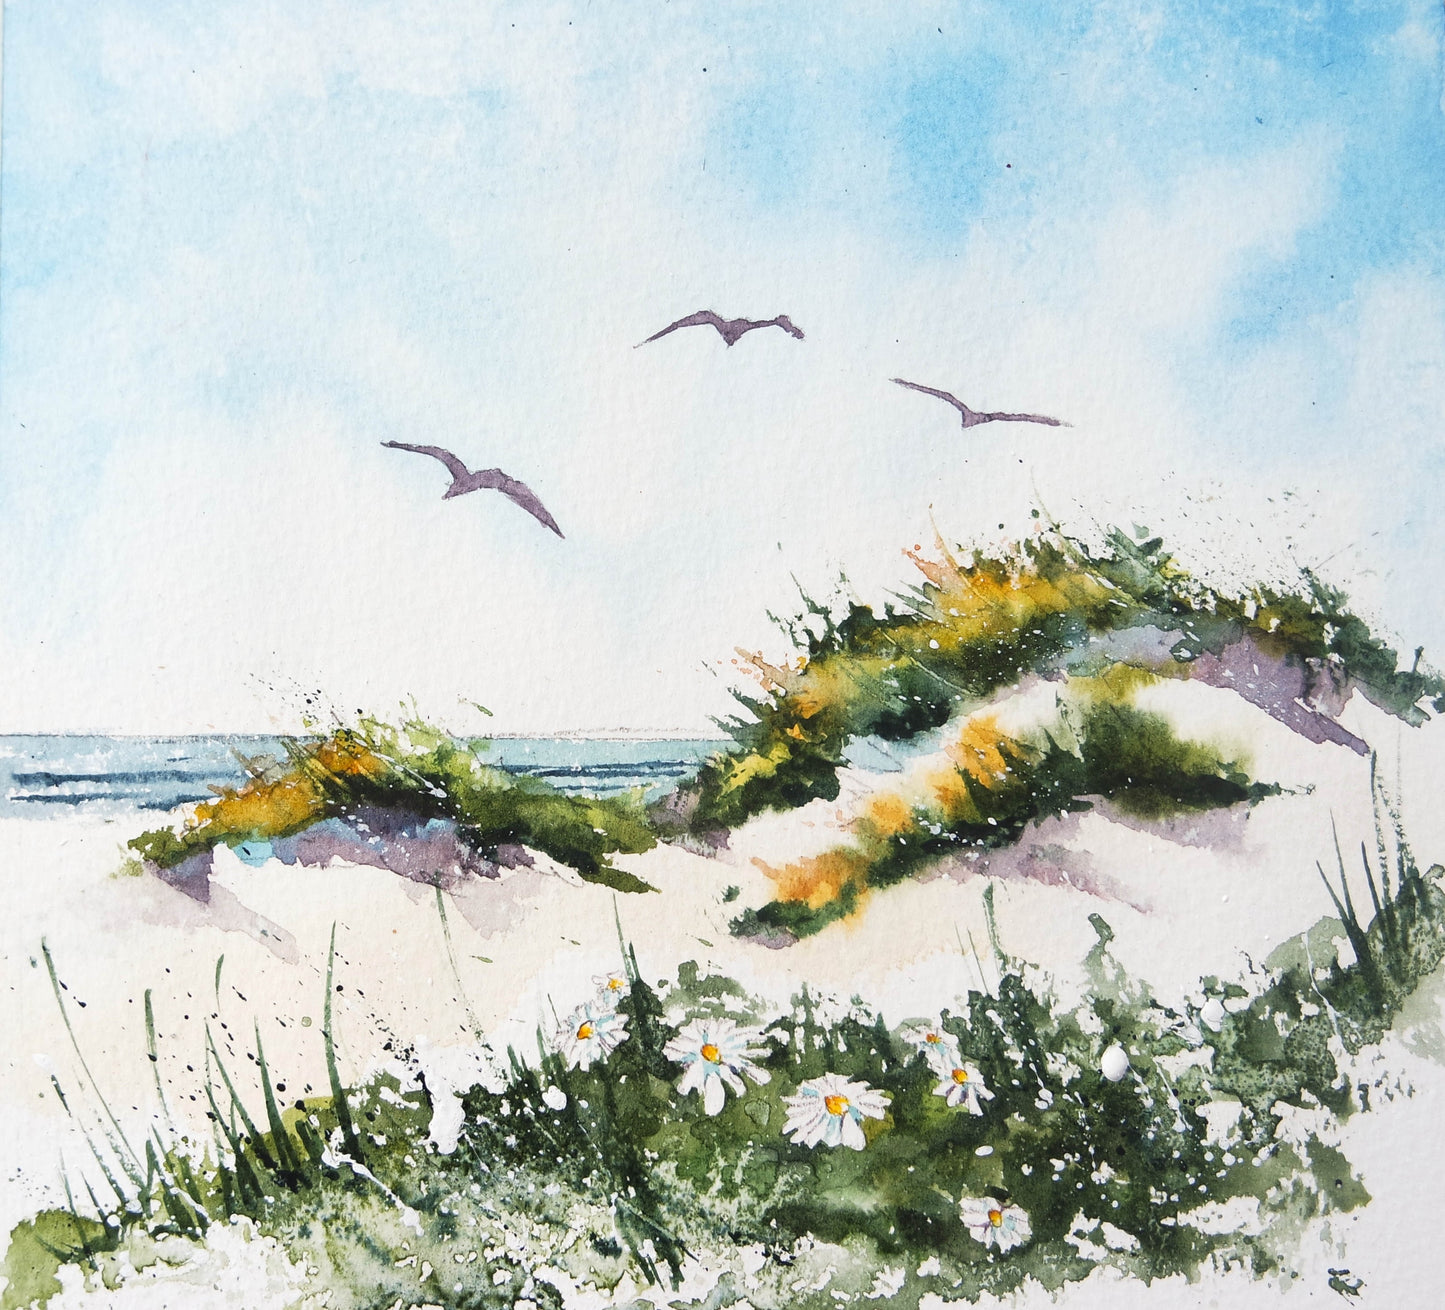 ***NEW*** Sea, hills, wildflowers and birds (5 cards)